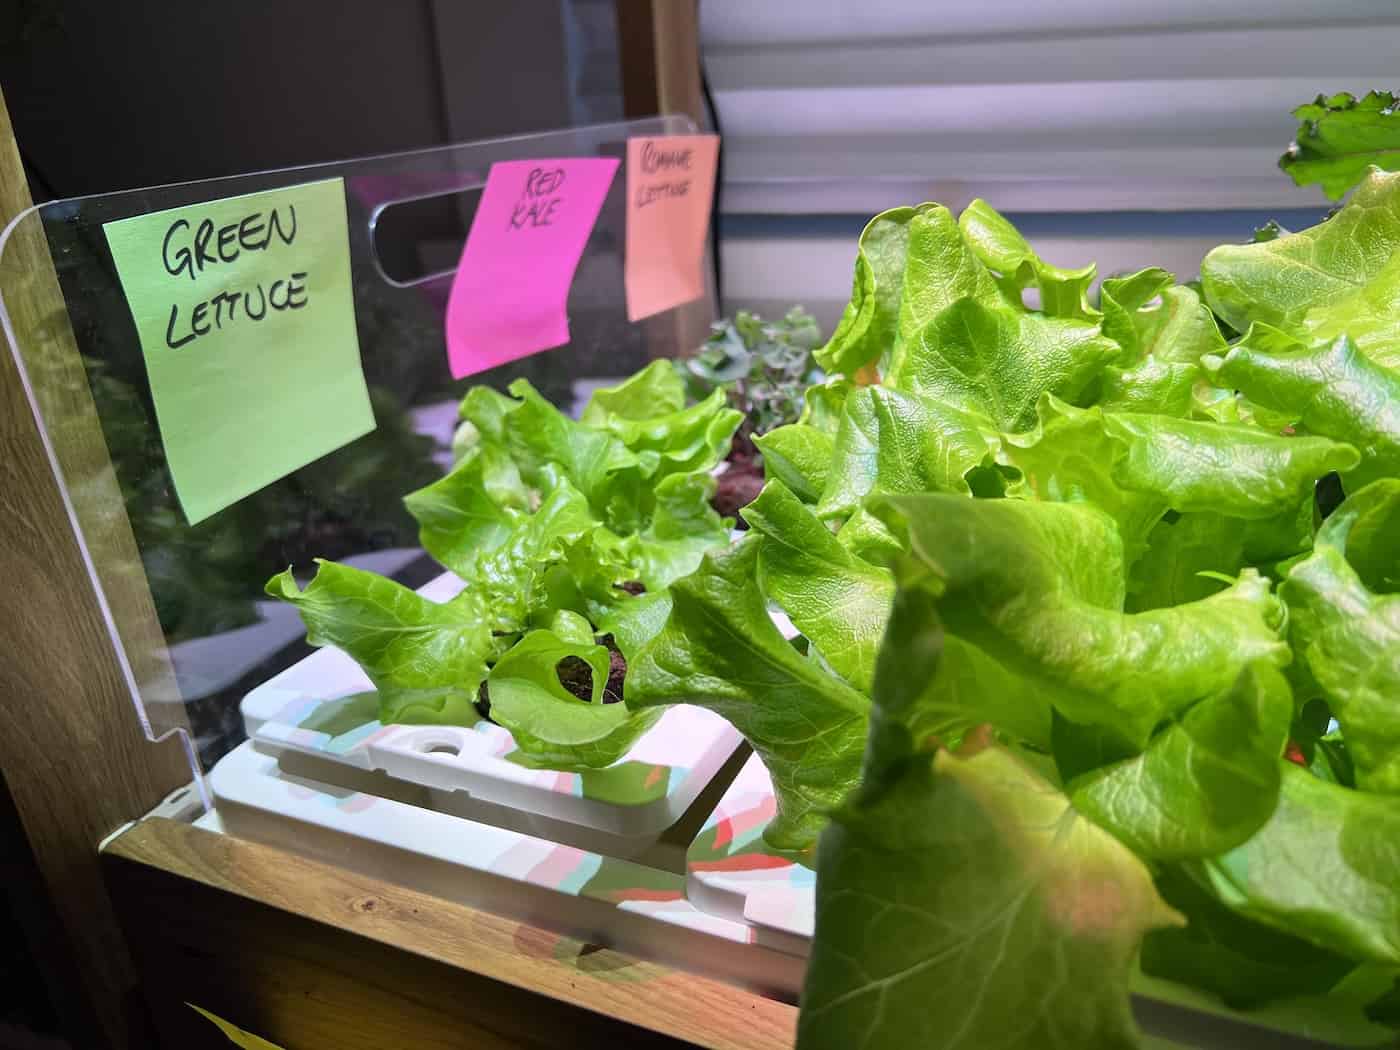 Planting click and grow lettuce each week